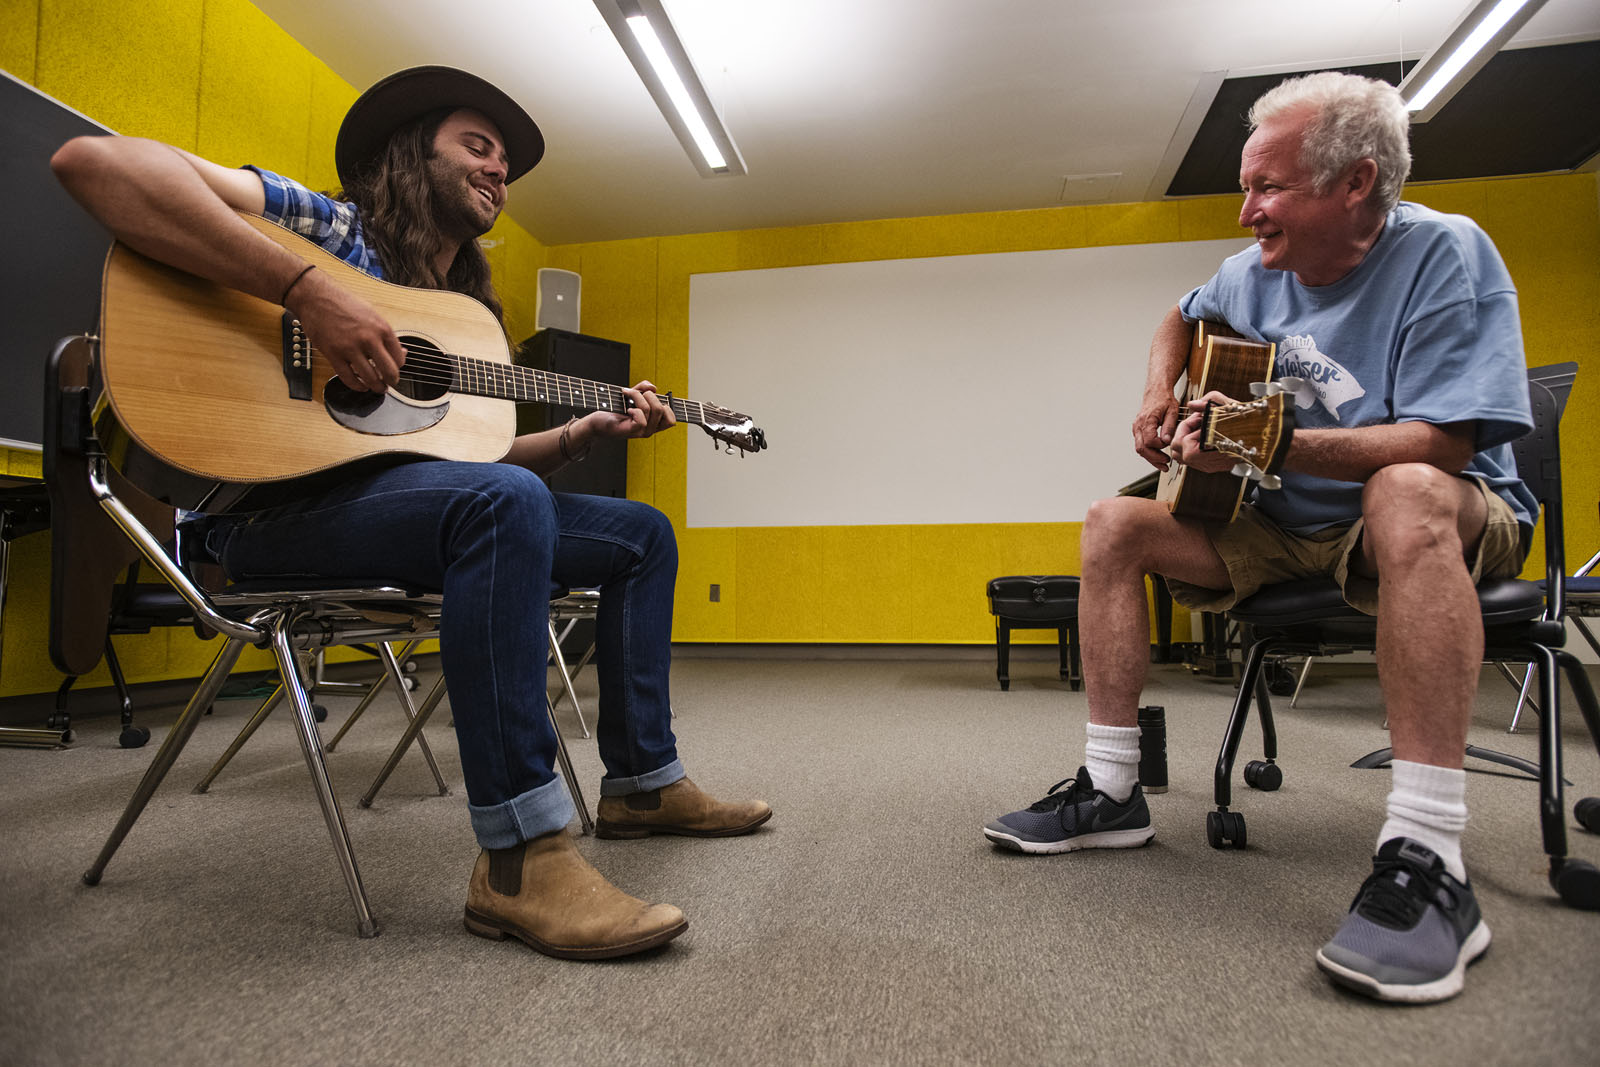 Garrett Blackwell ’17 and Nashville artist Jeff White share a laugh as they play together during a one-on-one session at the Bluegrass Workshop in Packard Hall on June 26, 2018.